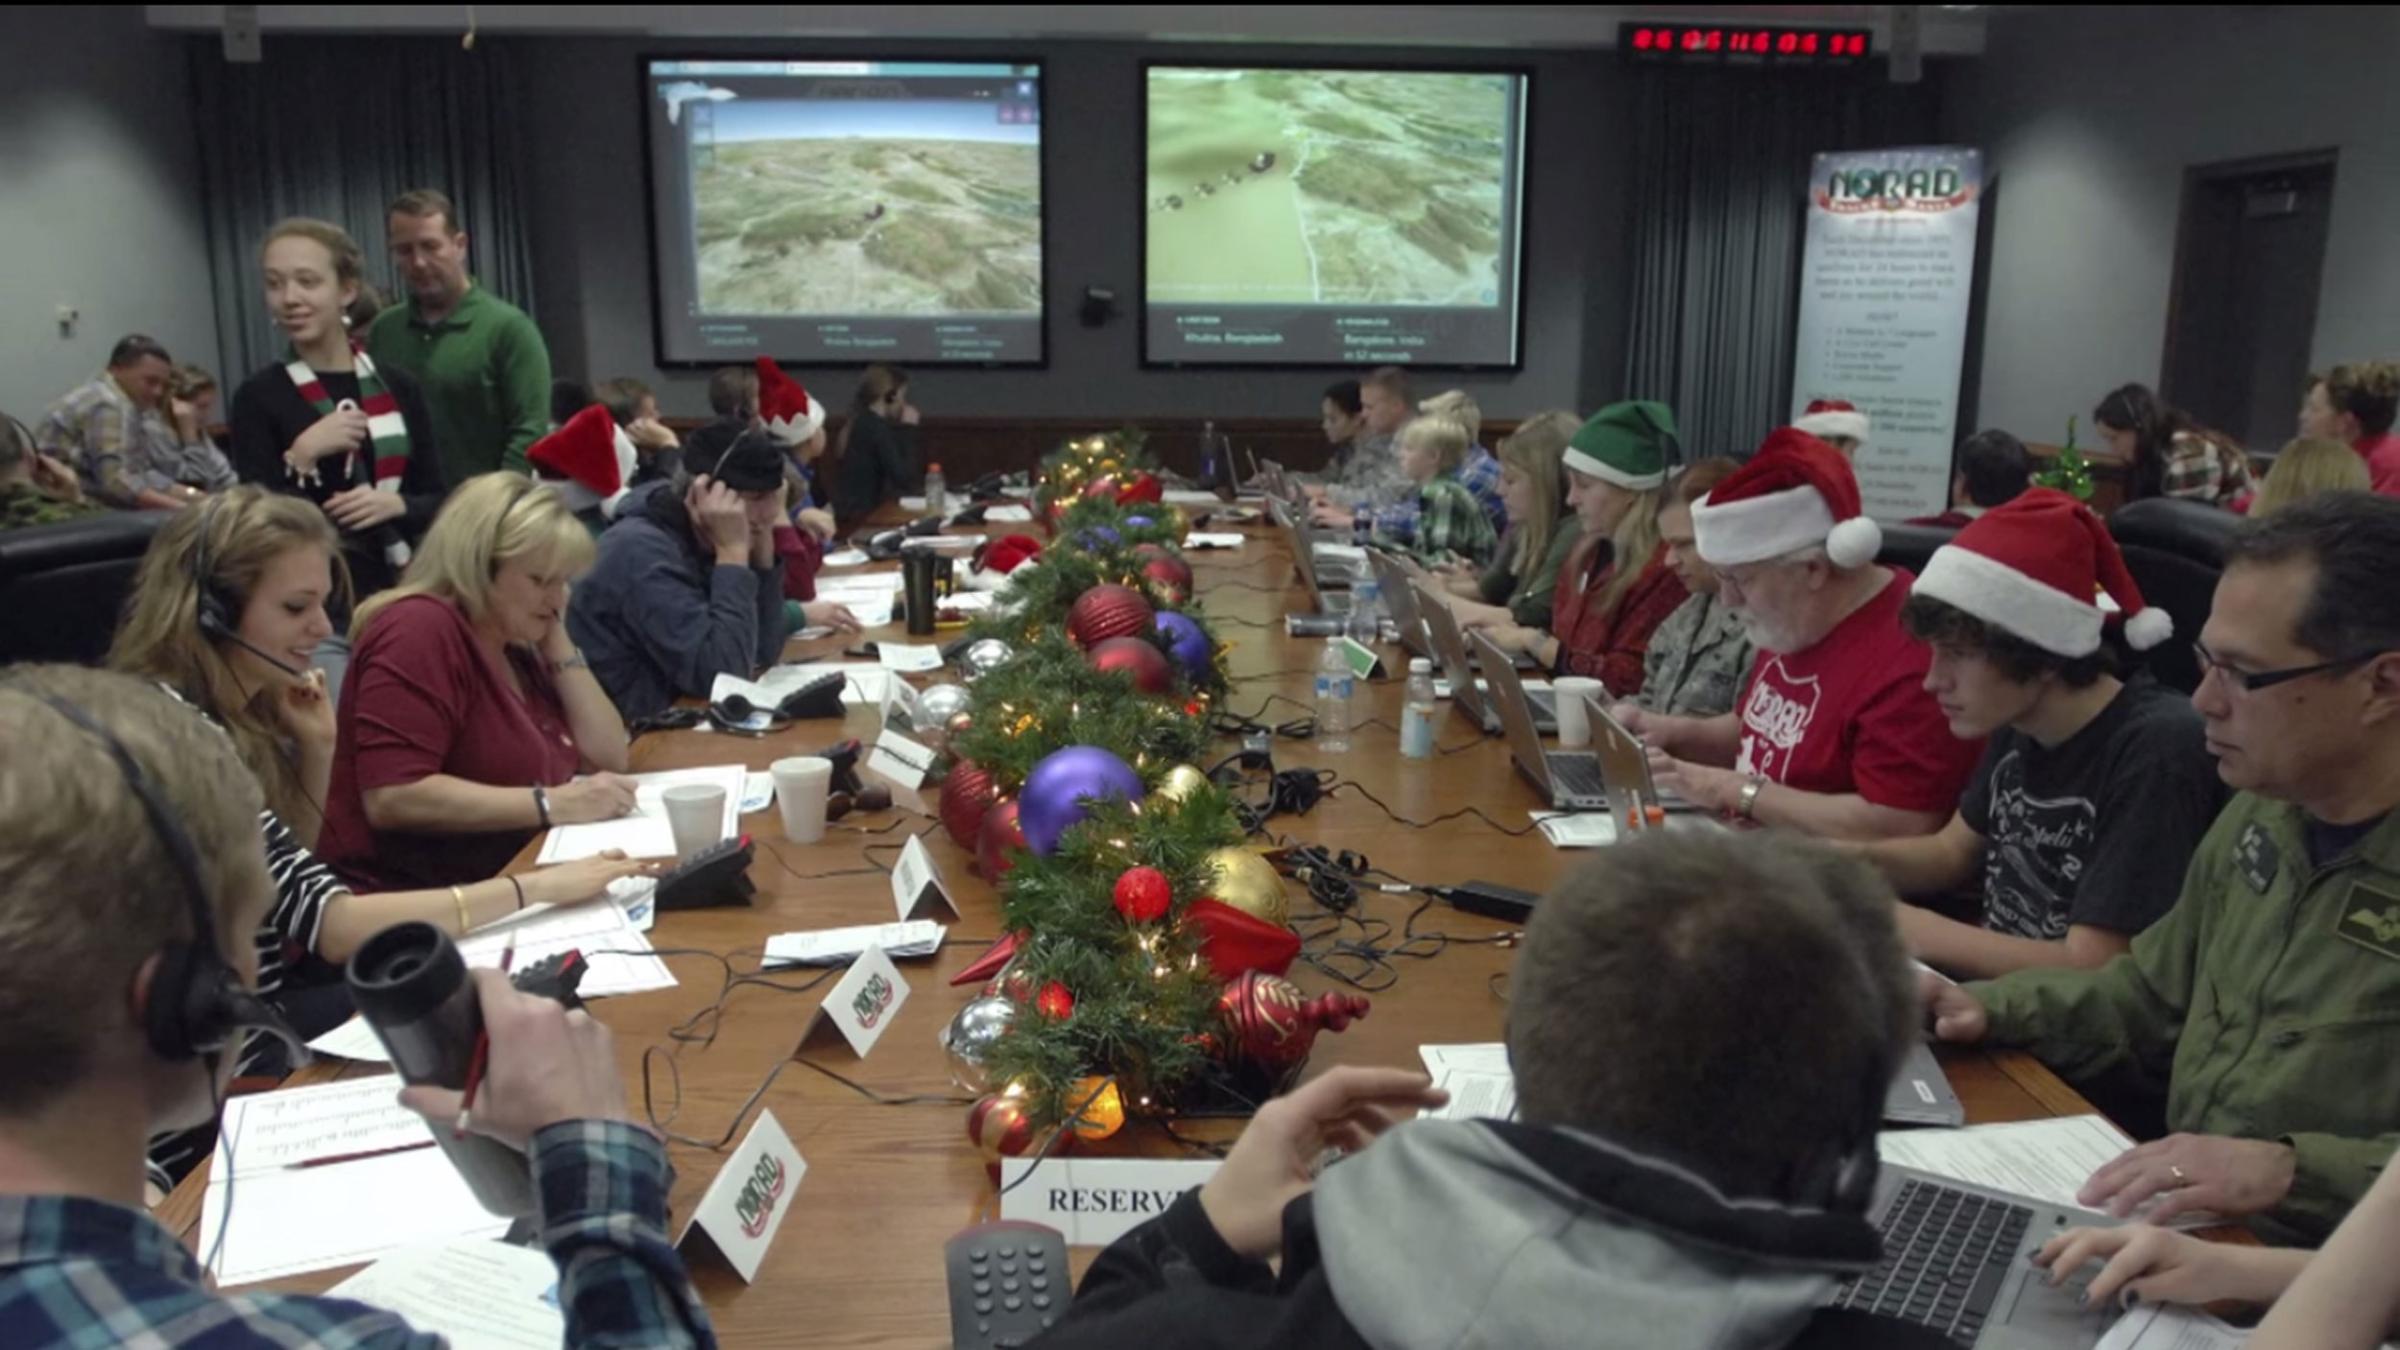 NORAD tracks Santa as he starts his journey on Dec. 24, 2014. Santa Claus has embarked on his annual Christmas Eve mission to deliver presents to millions of children after a smooth take-off from his North Pole base, at least according to U.S. military officials who track his reindeer-powered sleigh.